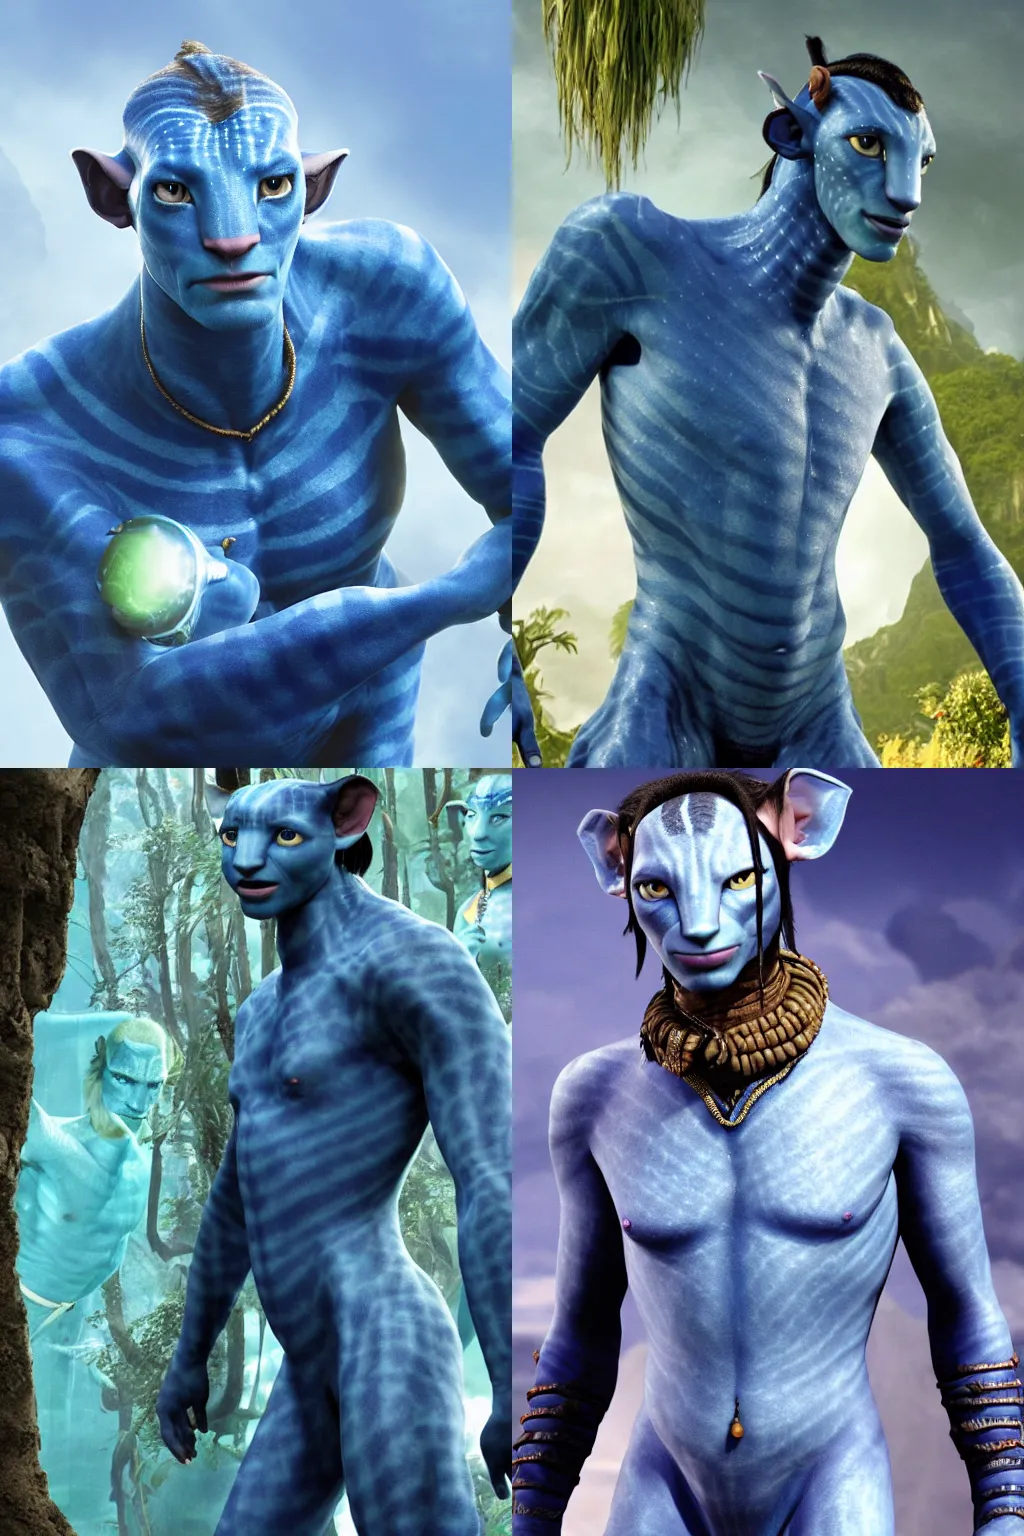 Prompt: andy serkis as a blue skinned na\'vi in avatar by james cameron